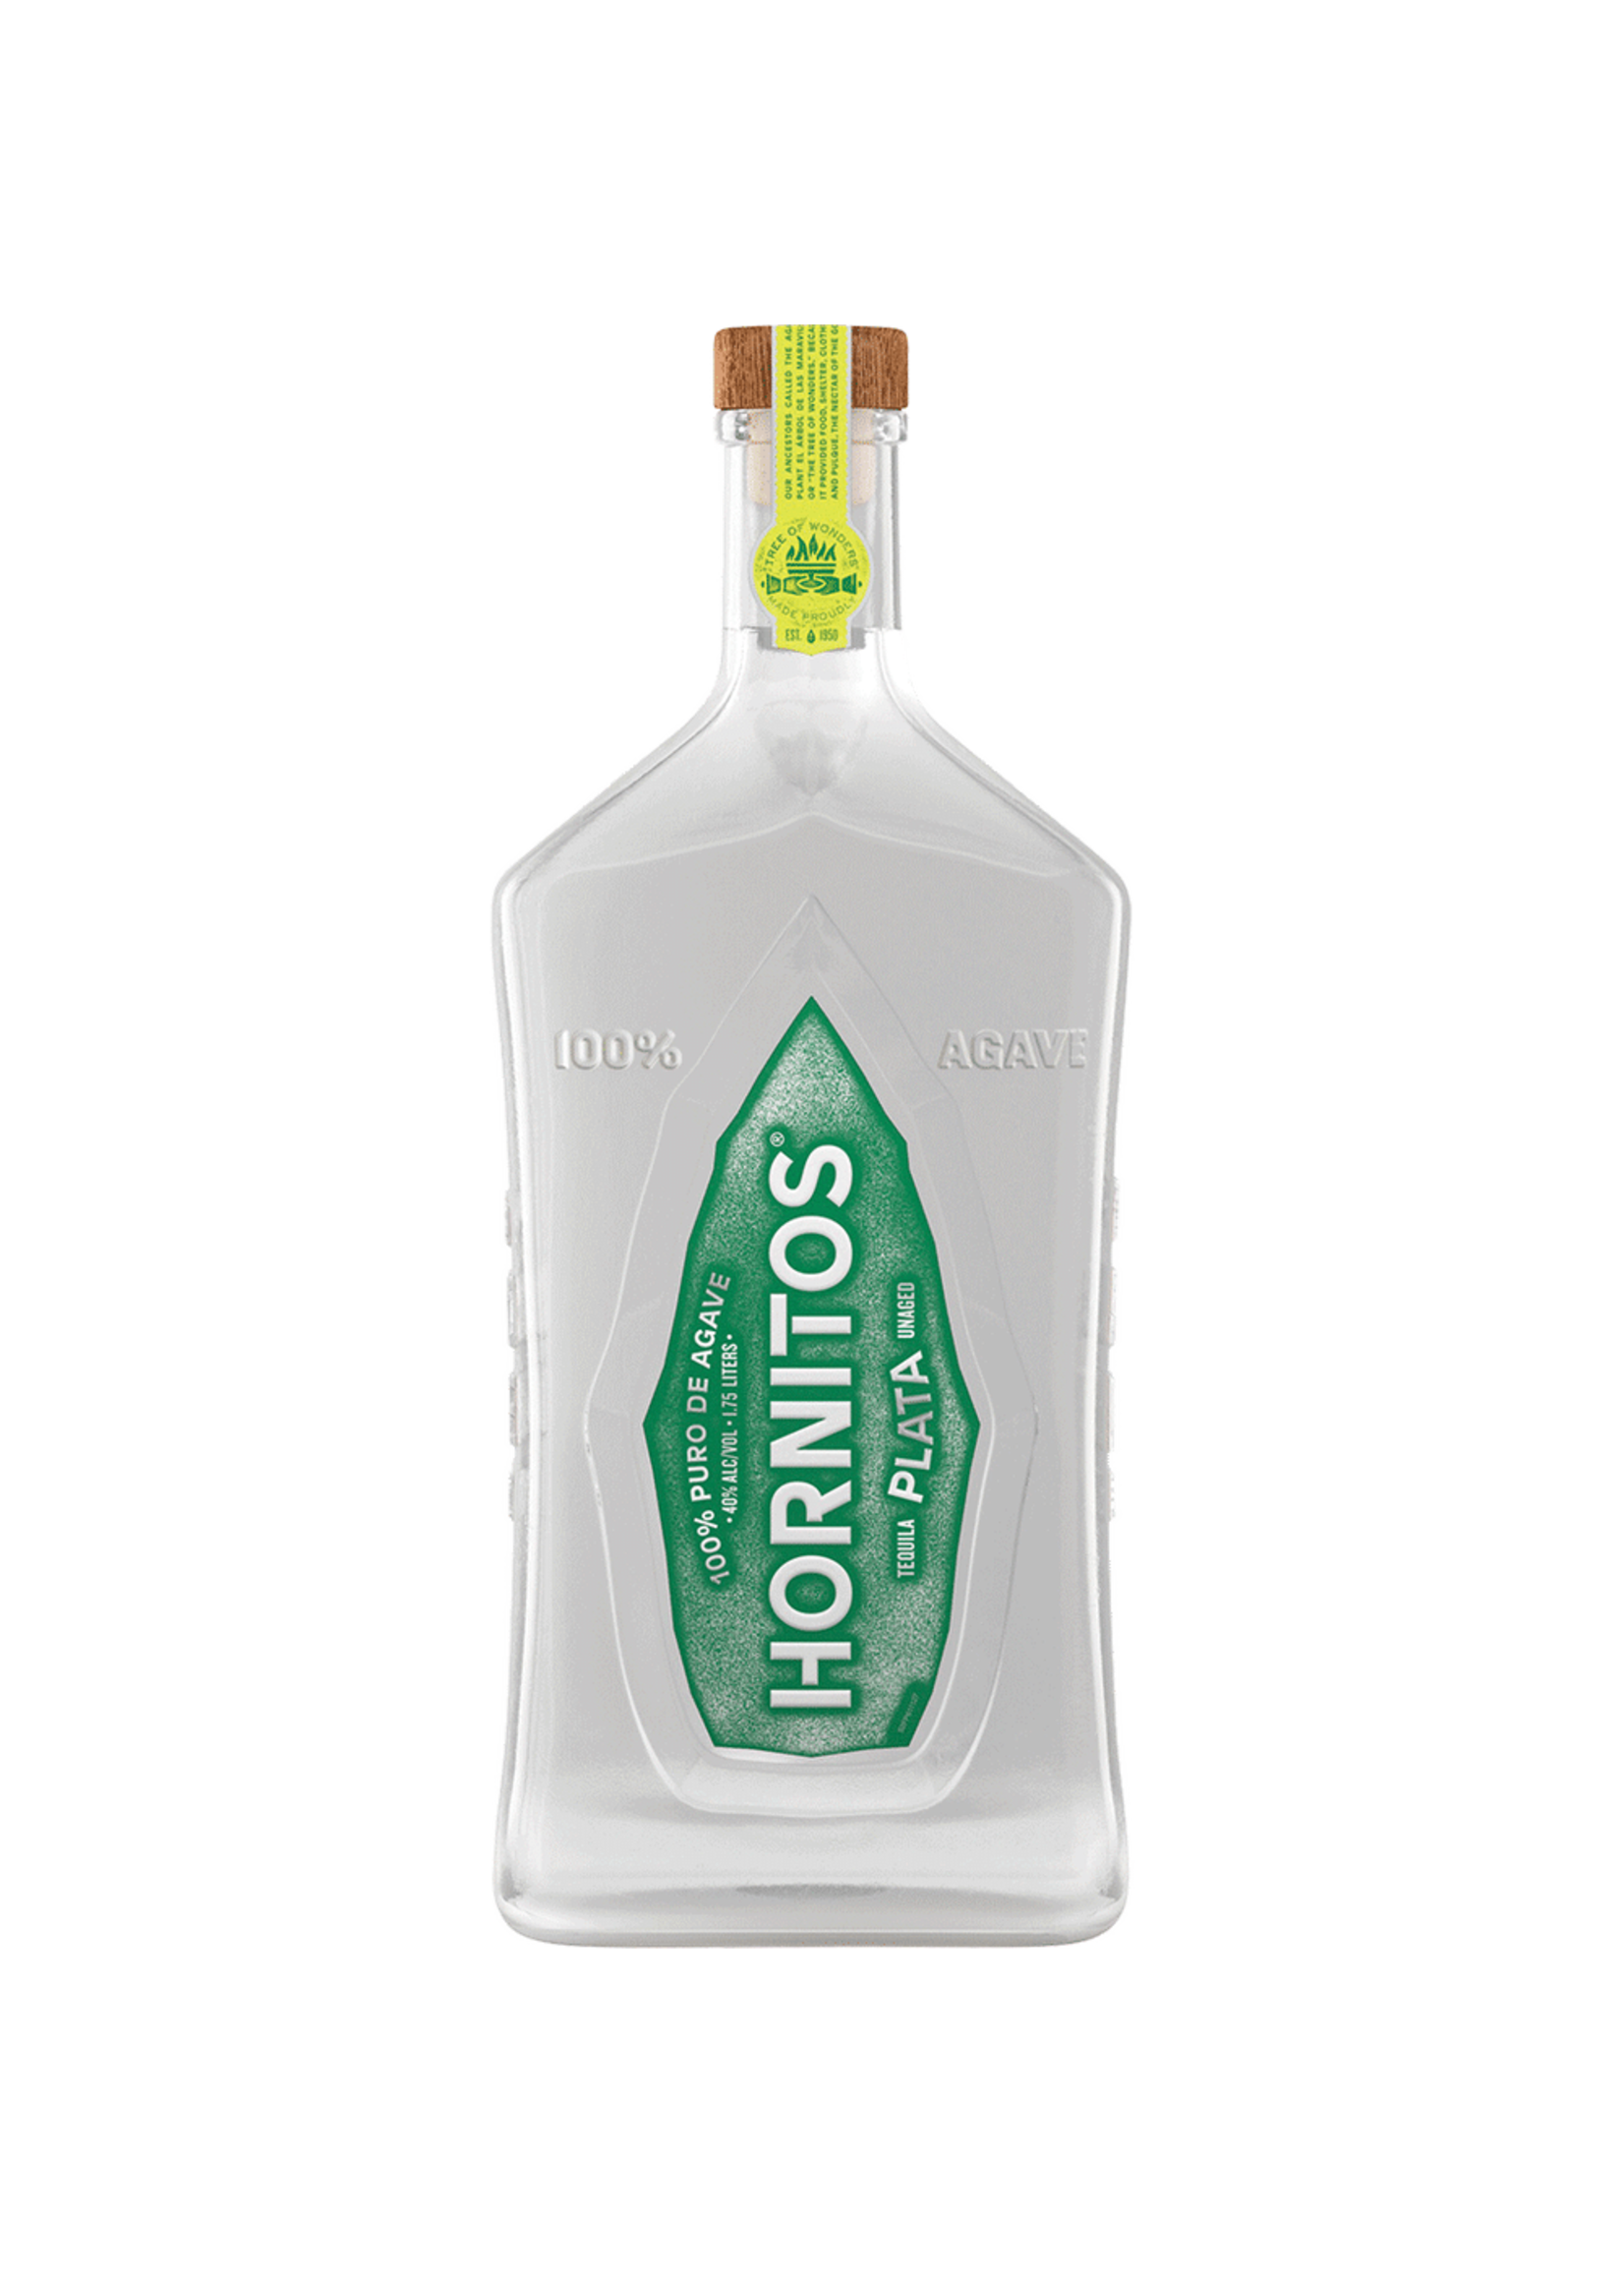 Hornitos Tequila Hornitos Plata Tequila 80Proof 1.75 Ltr